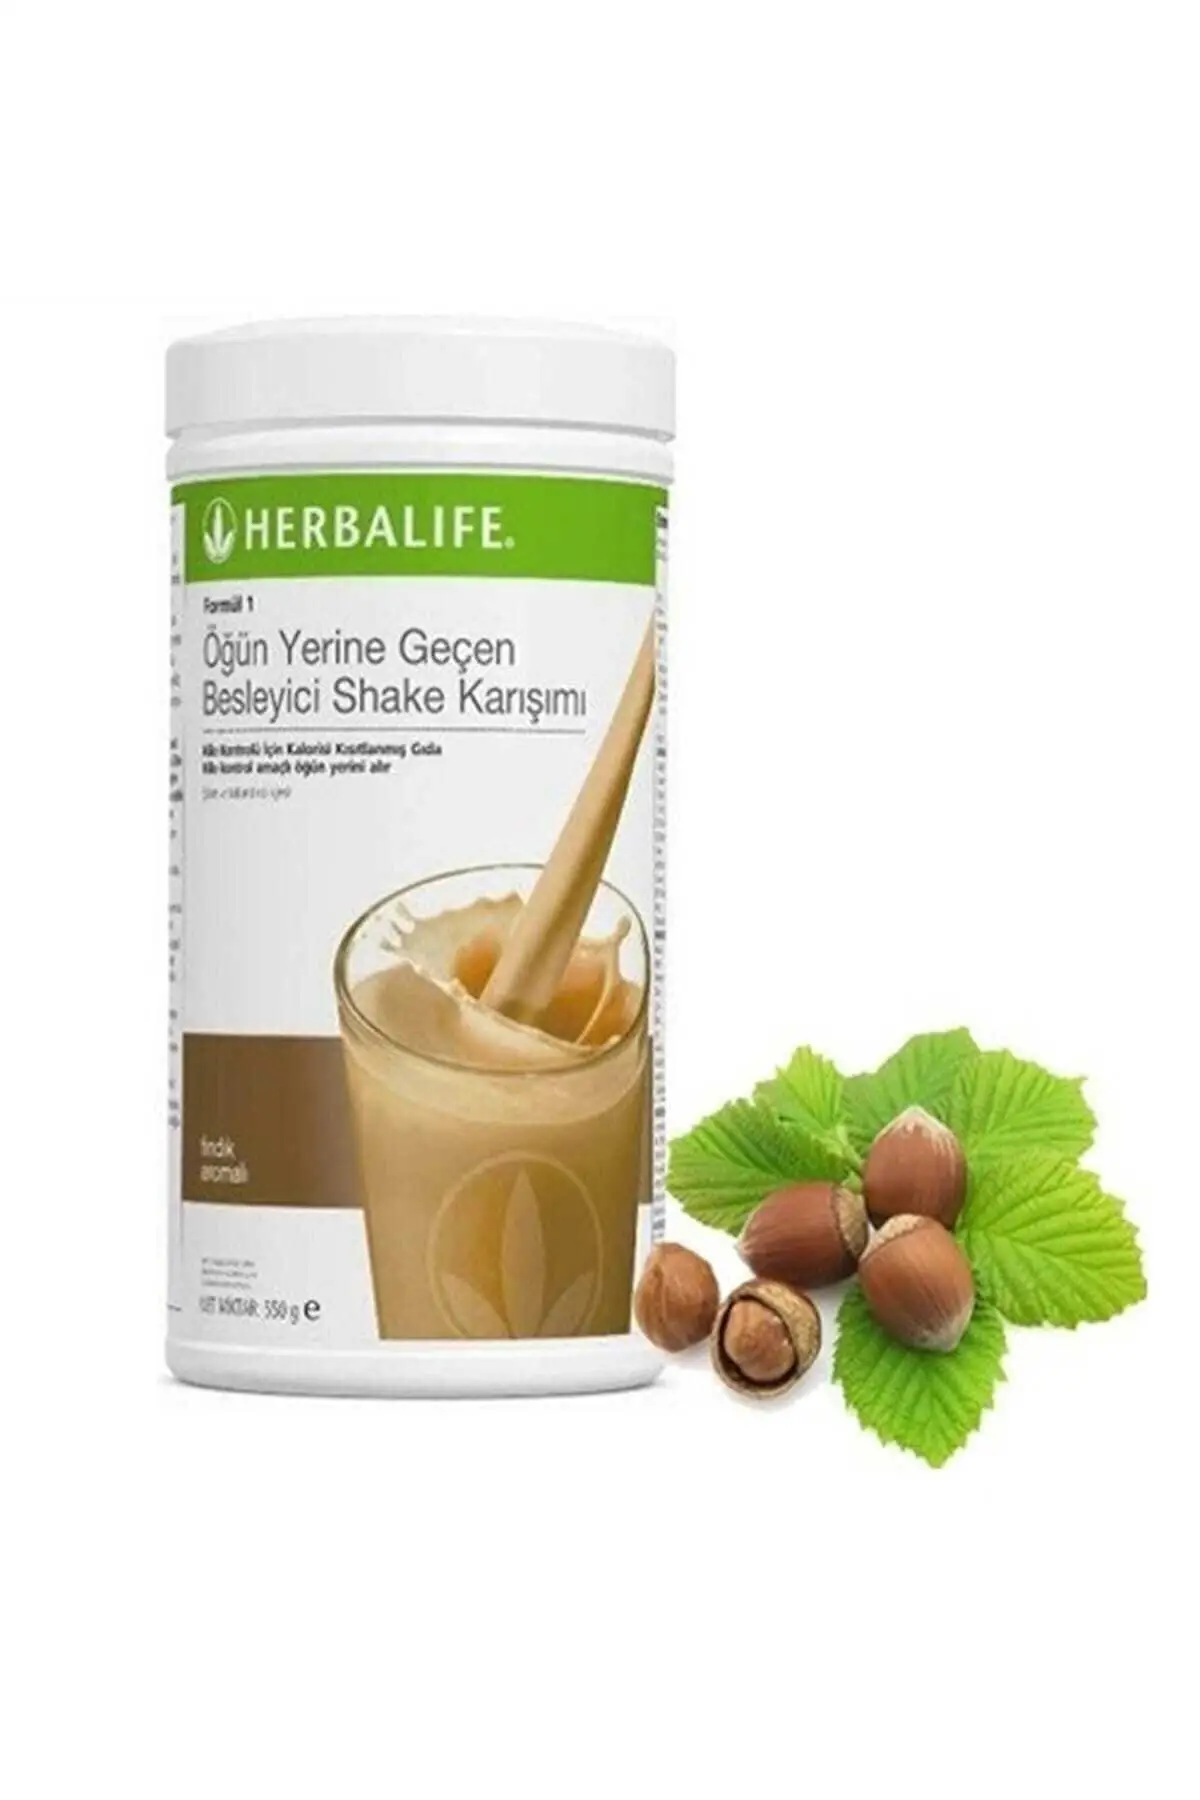 

Formula 1 Meal Replacement Last Besleyici Nut Shake Mix